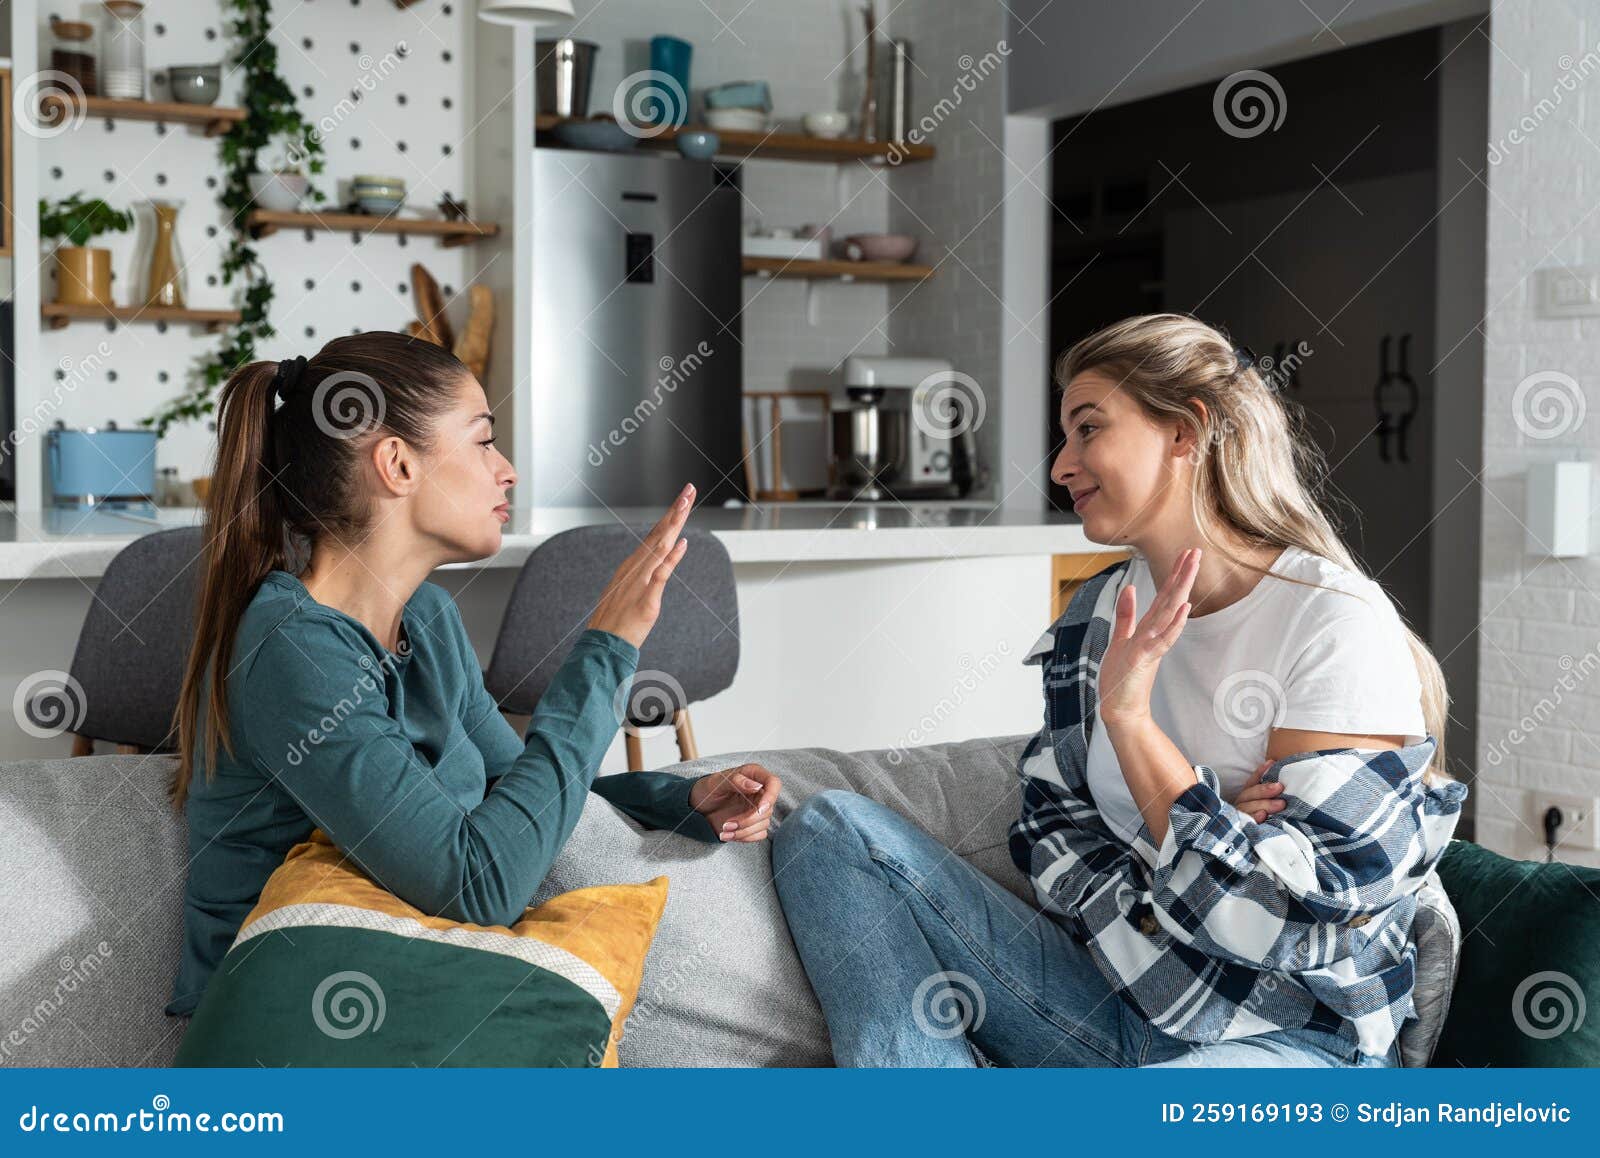 Young Women Lesbian Couple Lgbtq Roommates Having Argue Due The